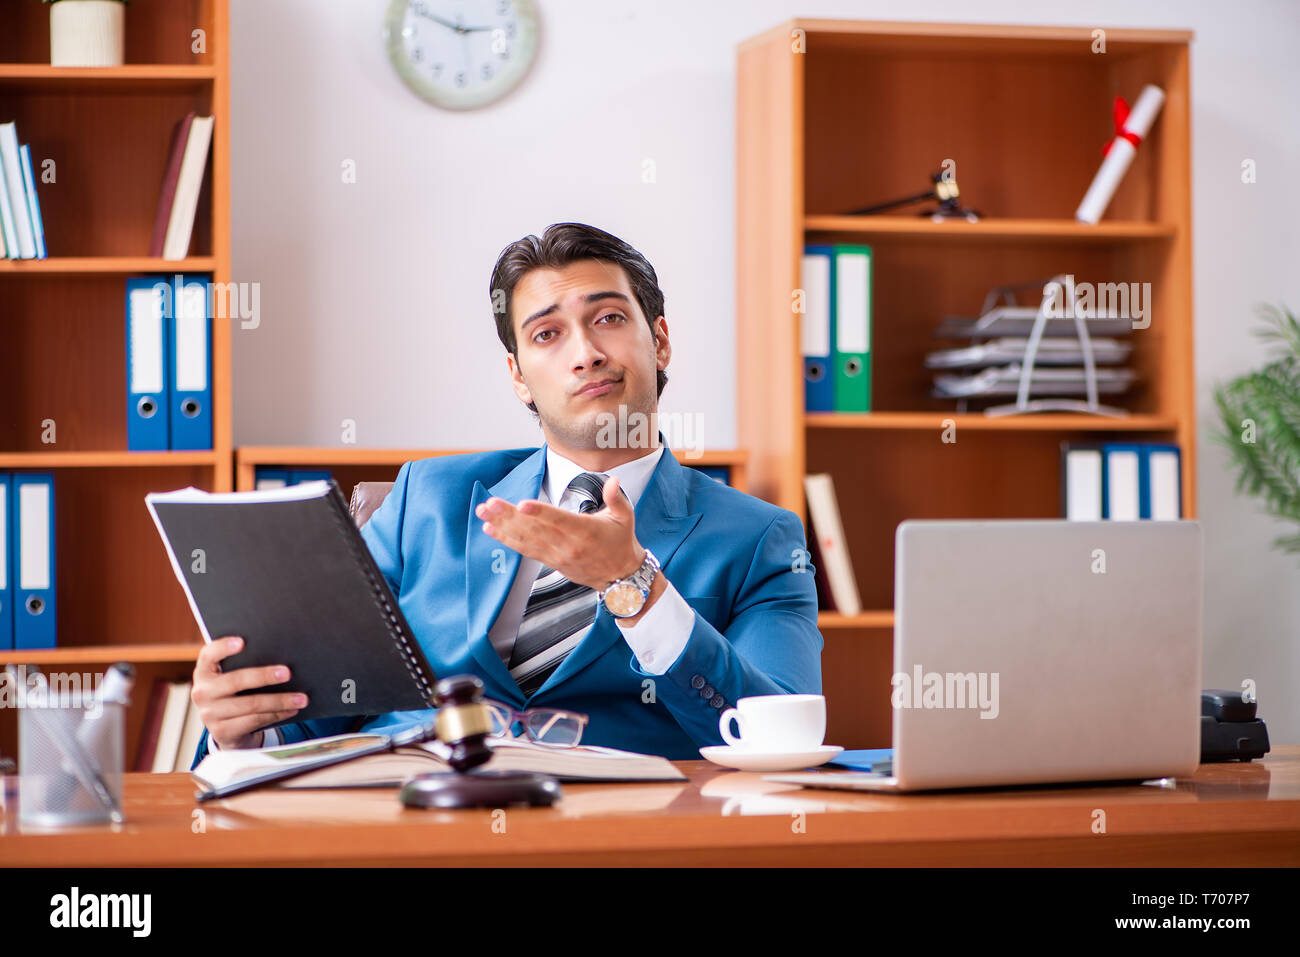 The lawyer working in the office Stock Photo